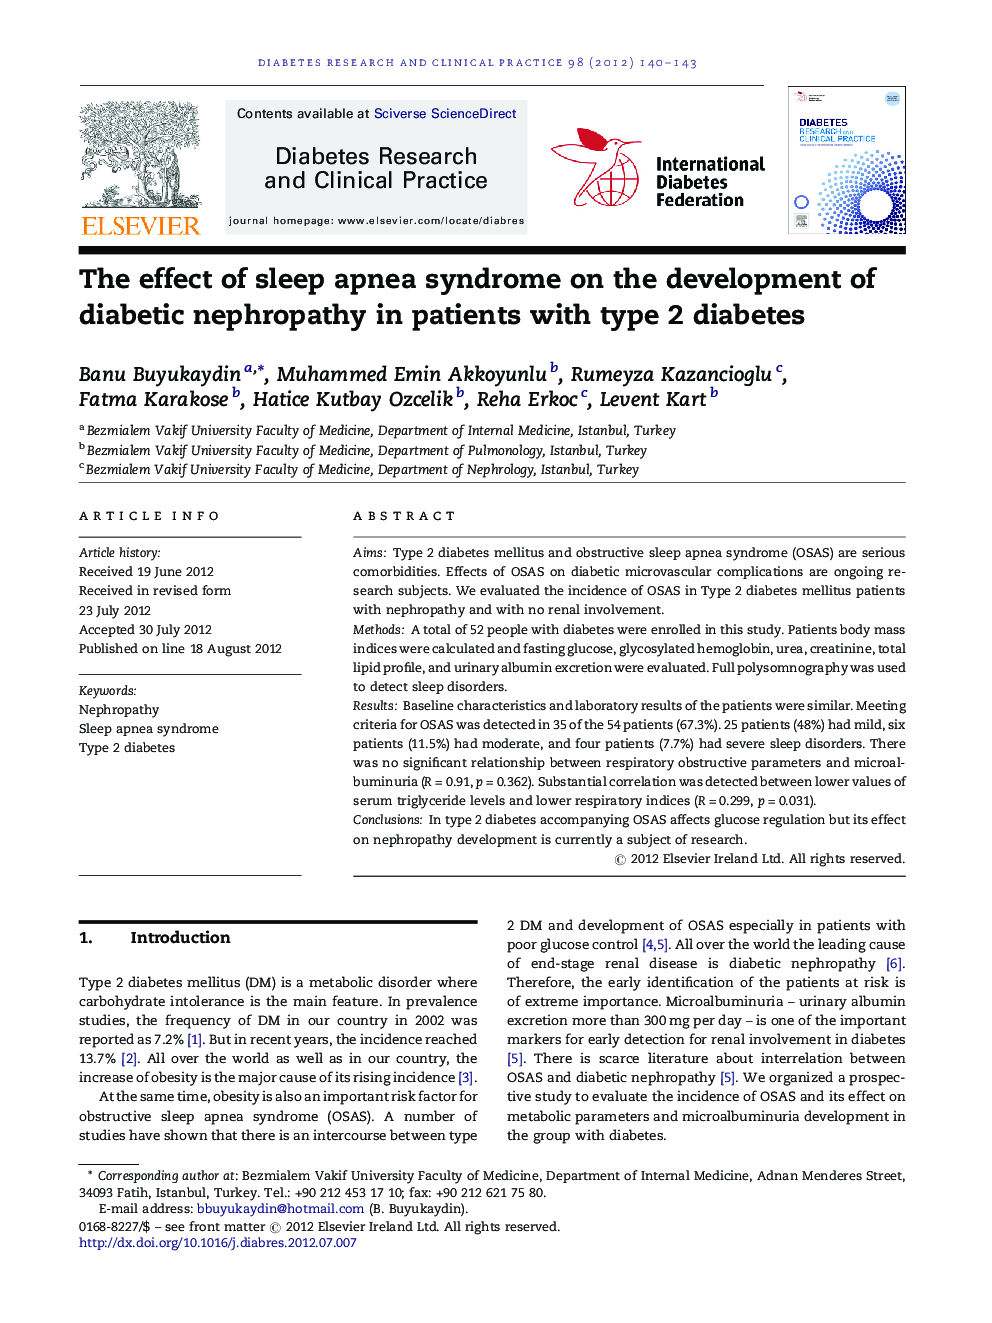 The effect of sleep apnea syndrome on the development of diabetic nephropathy in patients with type 2 diabetes